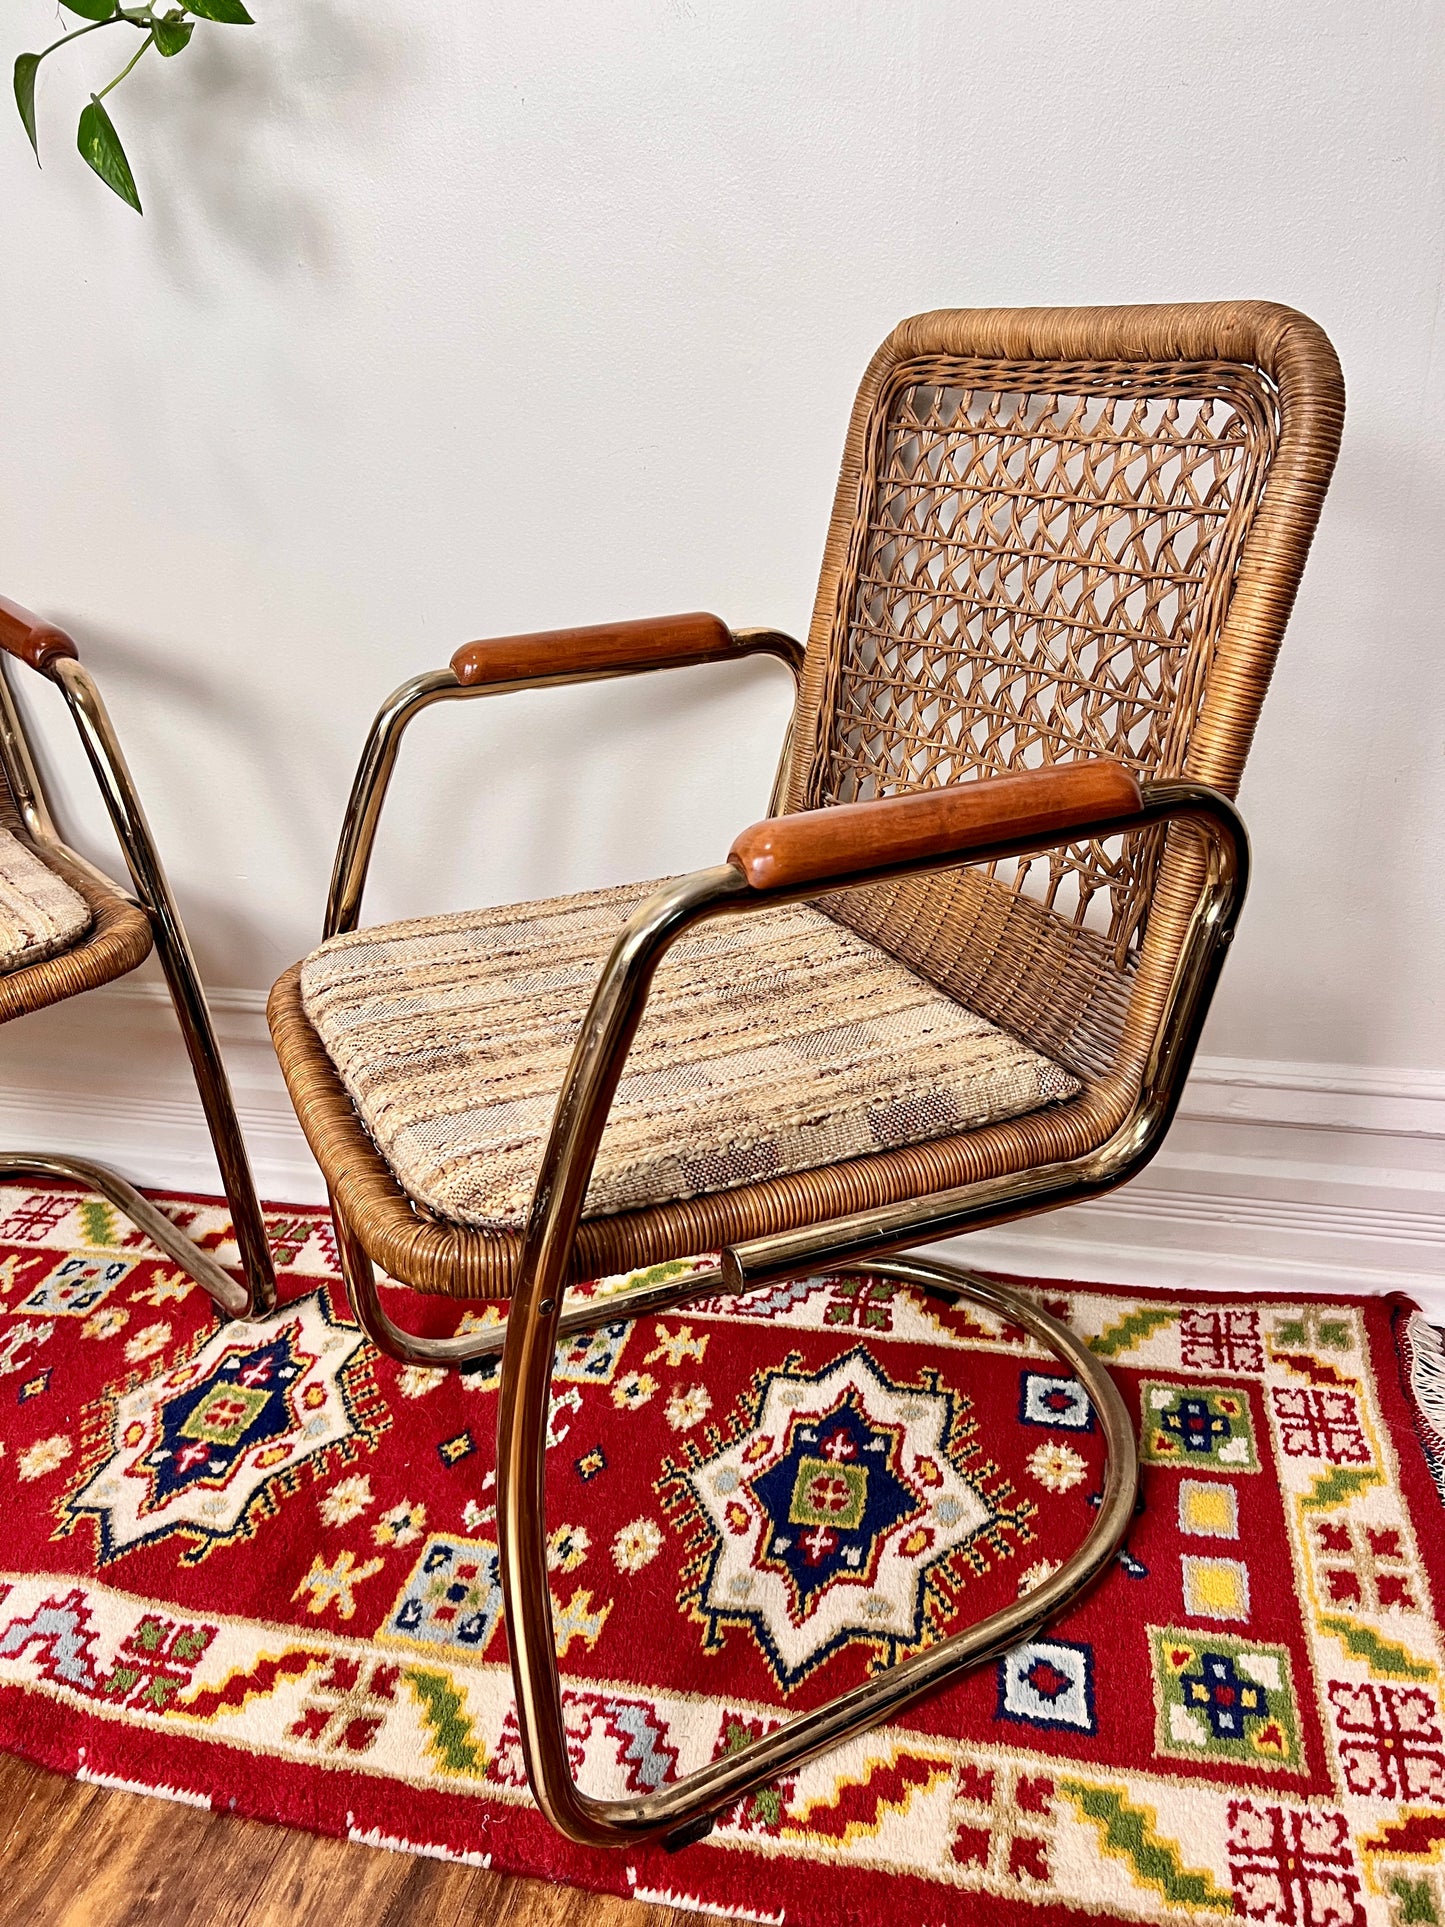 These are funky vintage cesca style cantilever wicker chairs with 60s tweed seat cushions